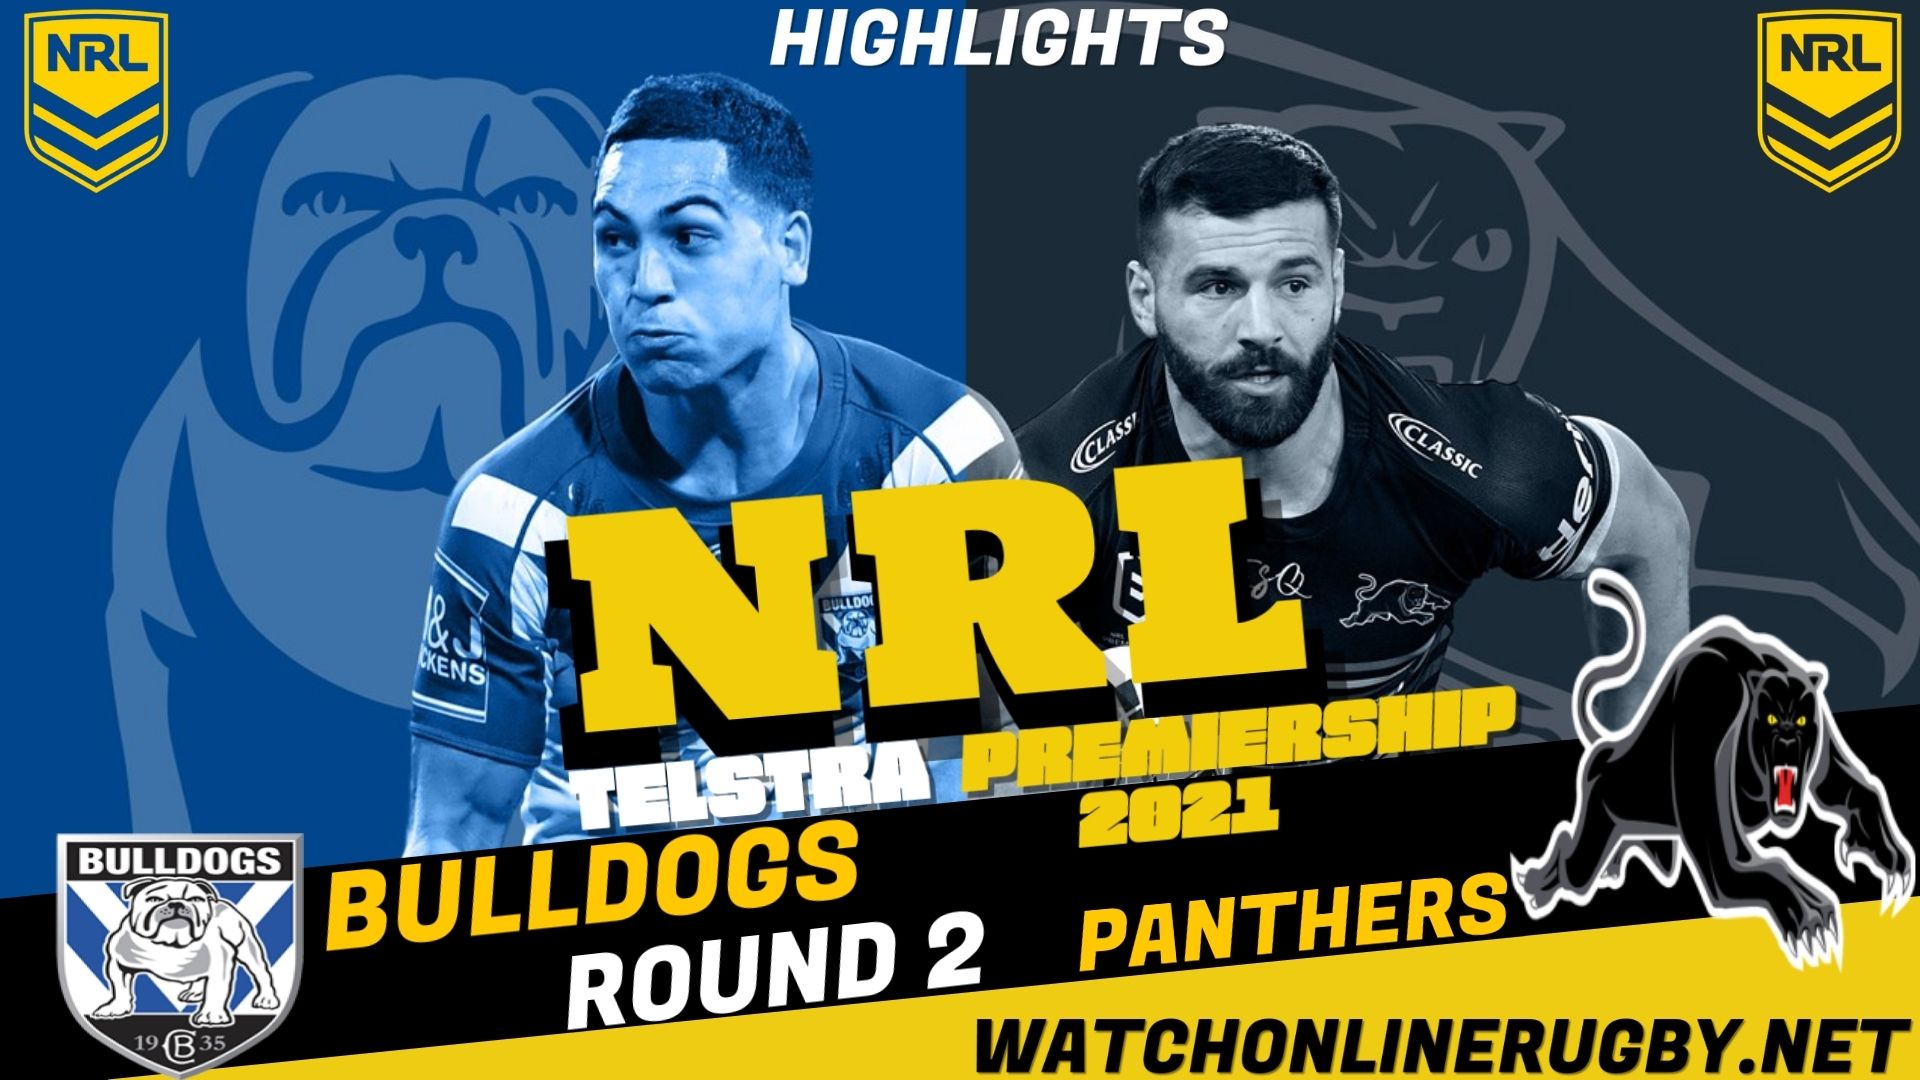 Bulldogs Vs Panthers Highlights RD 2 NRL Rugby